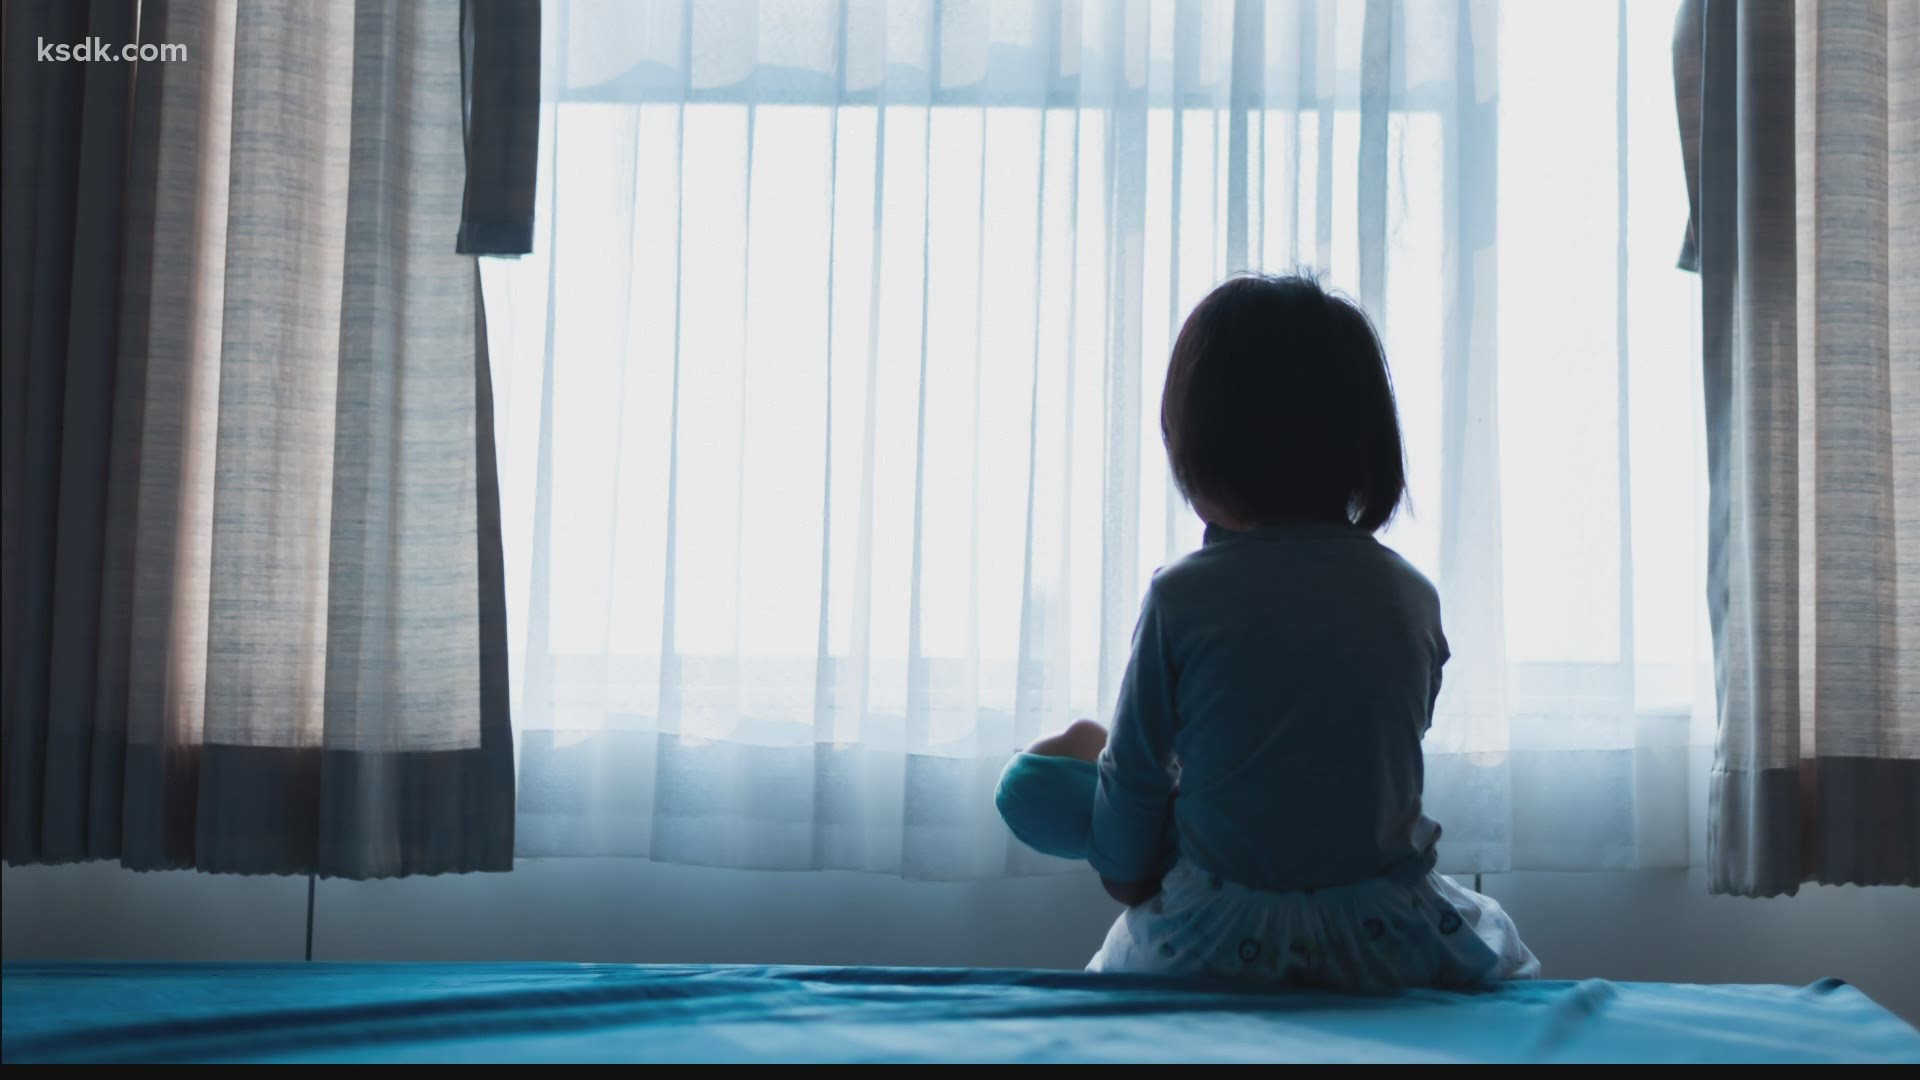 Nine children are reported abused or neglected every hour in Missouri. In Illinois, there are more than 200 reports of child abuse every day.